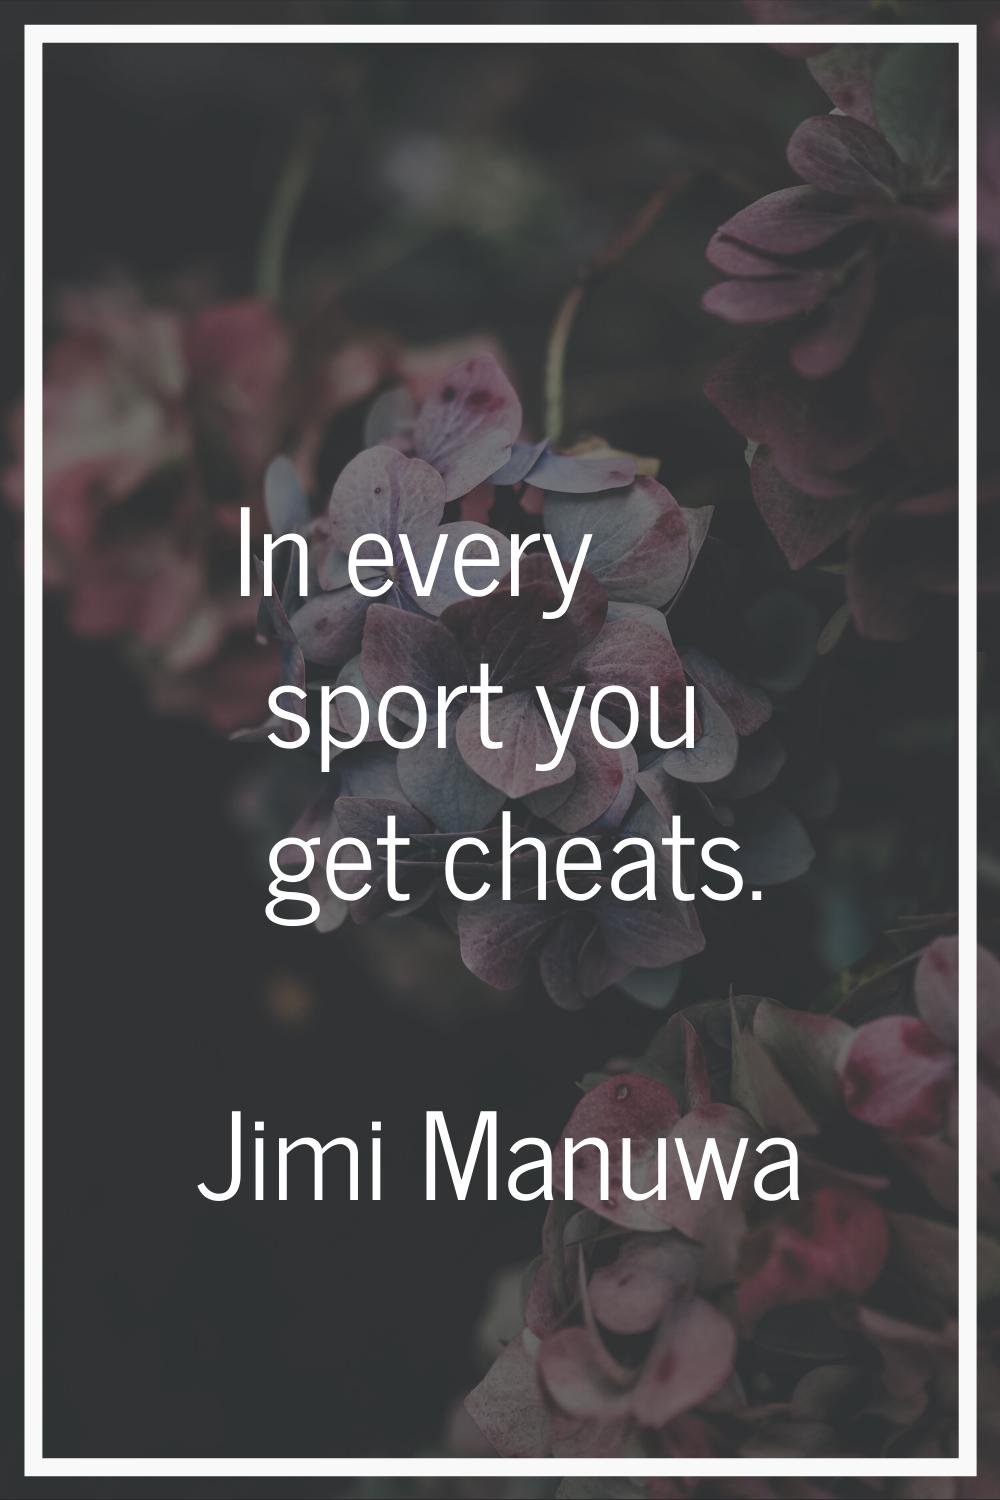 In every sport you get cheats.